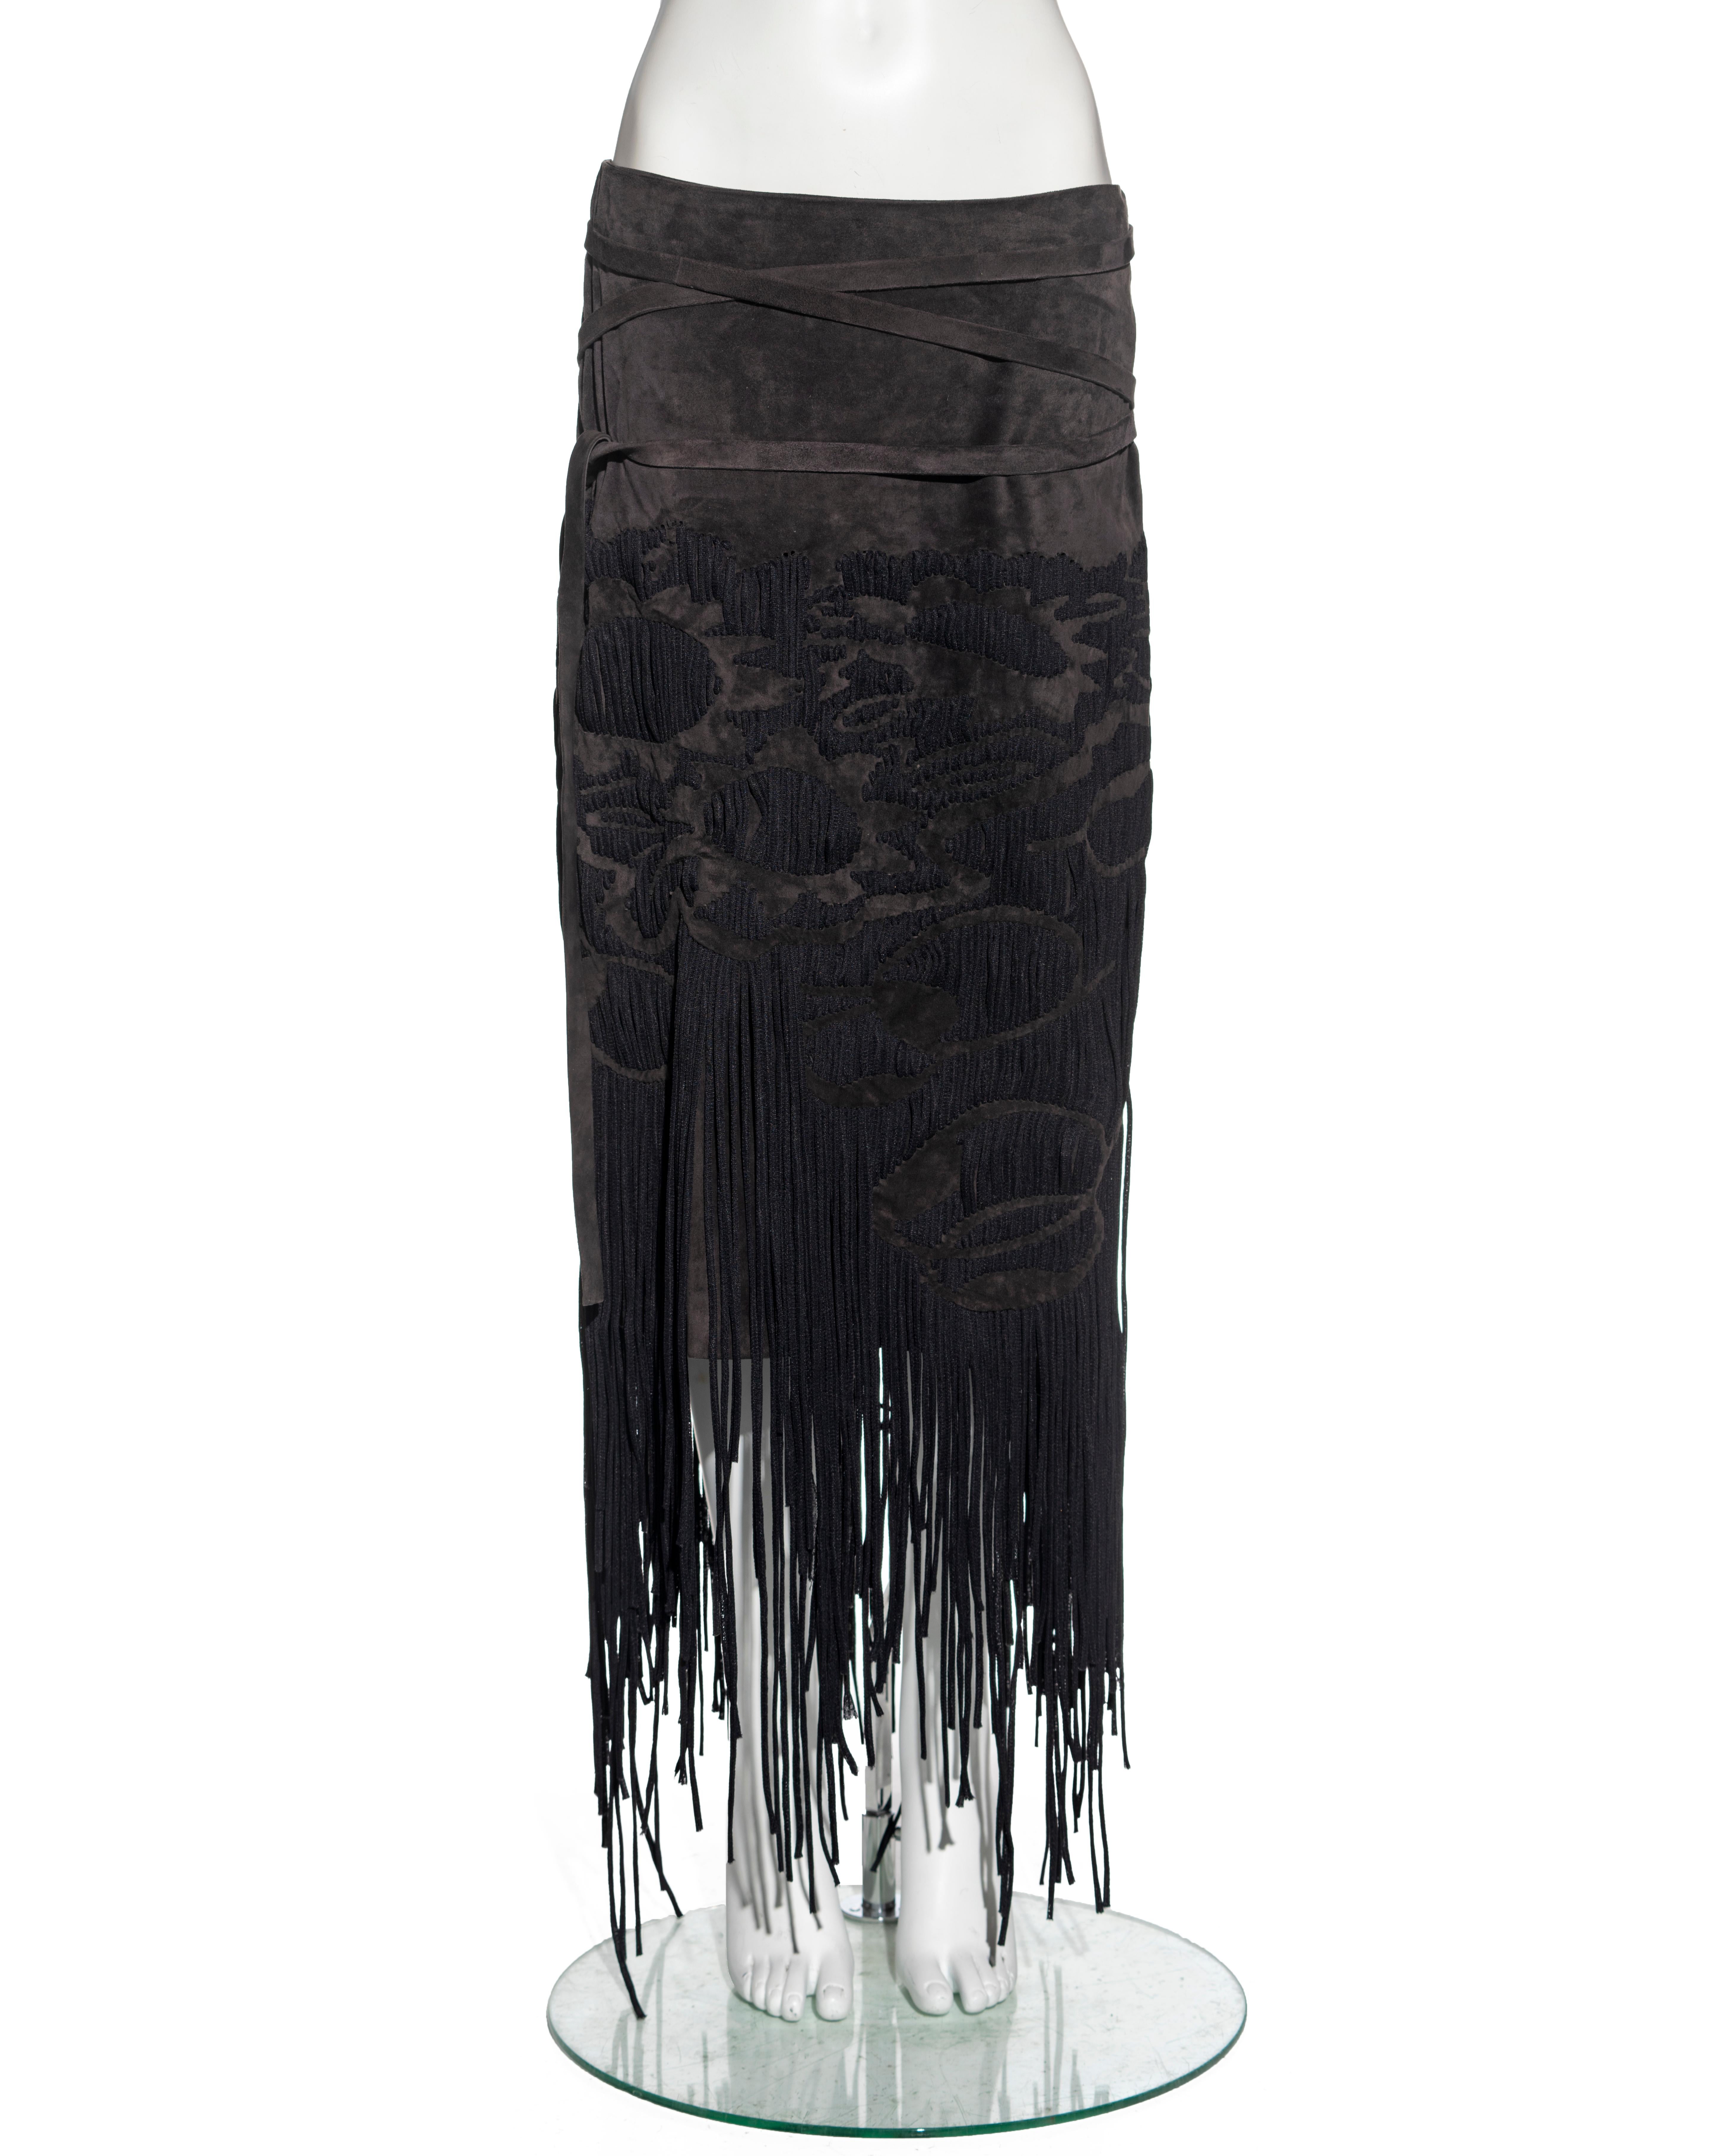 ▪ Yves Saint Laurent runway skirt
▪ Designed by Tom Ford 
▪ Sold by One of a Kind Archive
▪ Constructed from dark brown suede 
▪ Abstract pattern made up with a multitude of woven laces  
▪ Long fringe trim 
▪ Attached belt  
▪ Silk lining 
▪